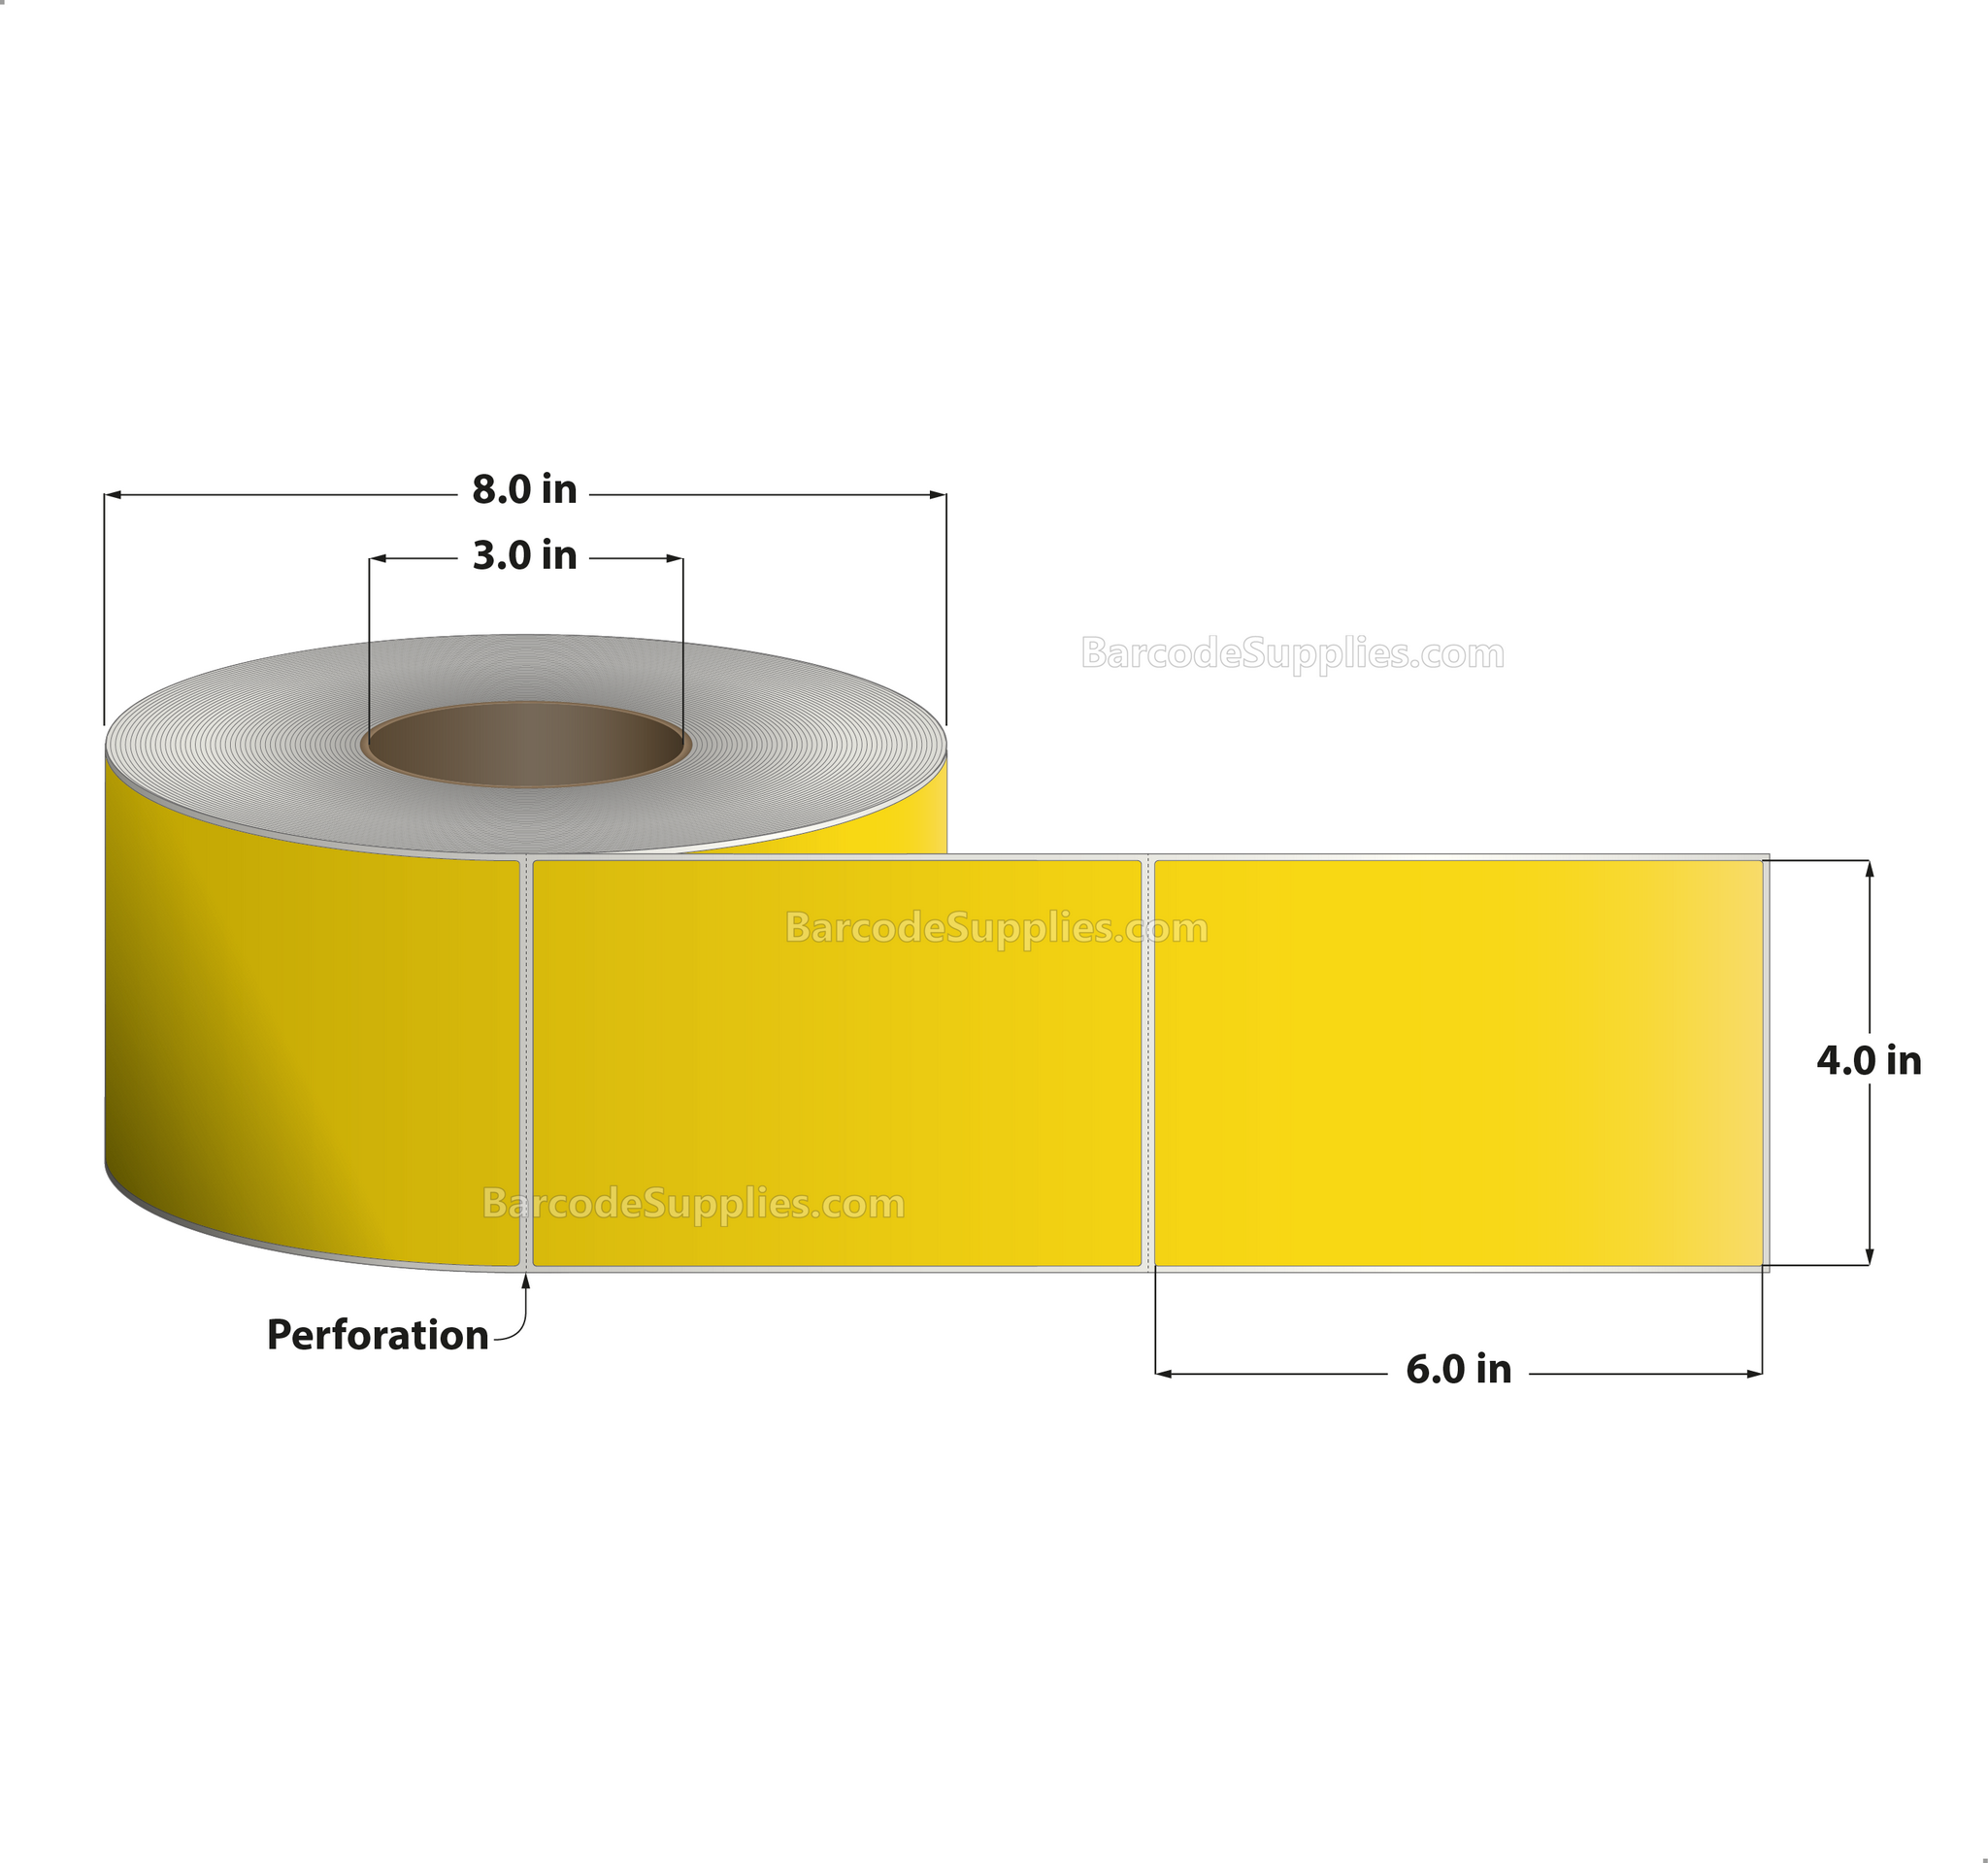 4 x 6 Direct Thermal Pantone Yellow Labels With Permanent Acrylic Adhesive - Perforated - 1000 Labels Per Roll - Carton Of 4 Rolls - 4000 Labels Total - MPN: DT46-1PY